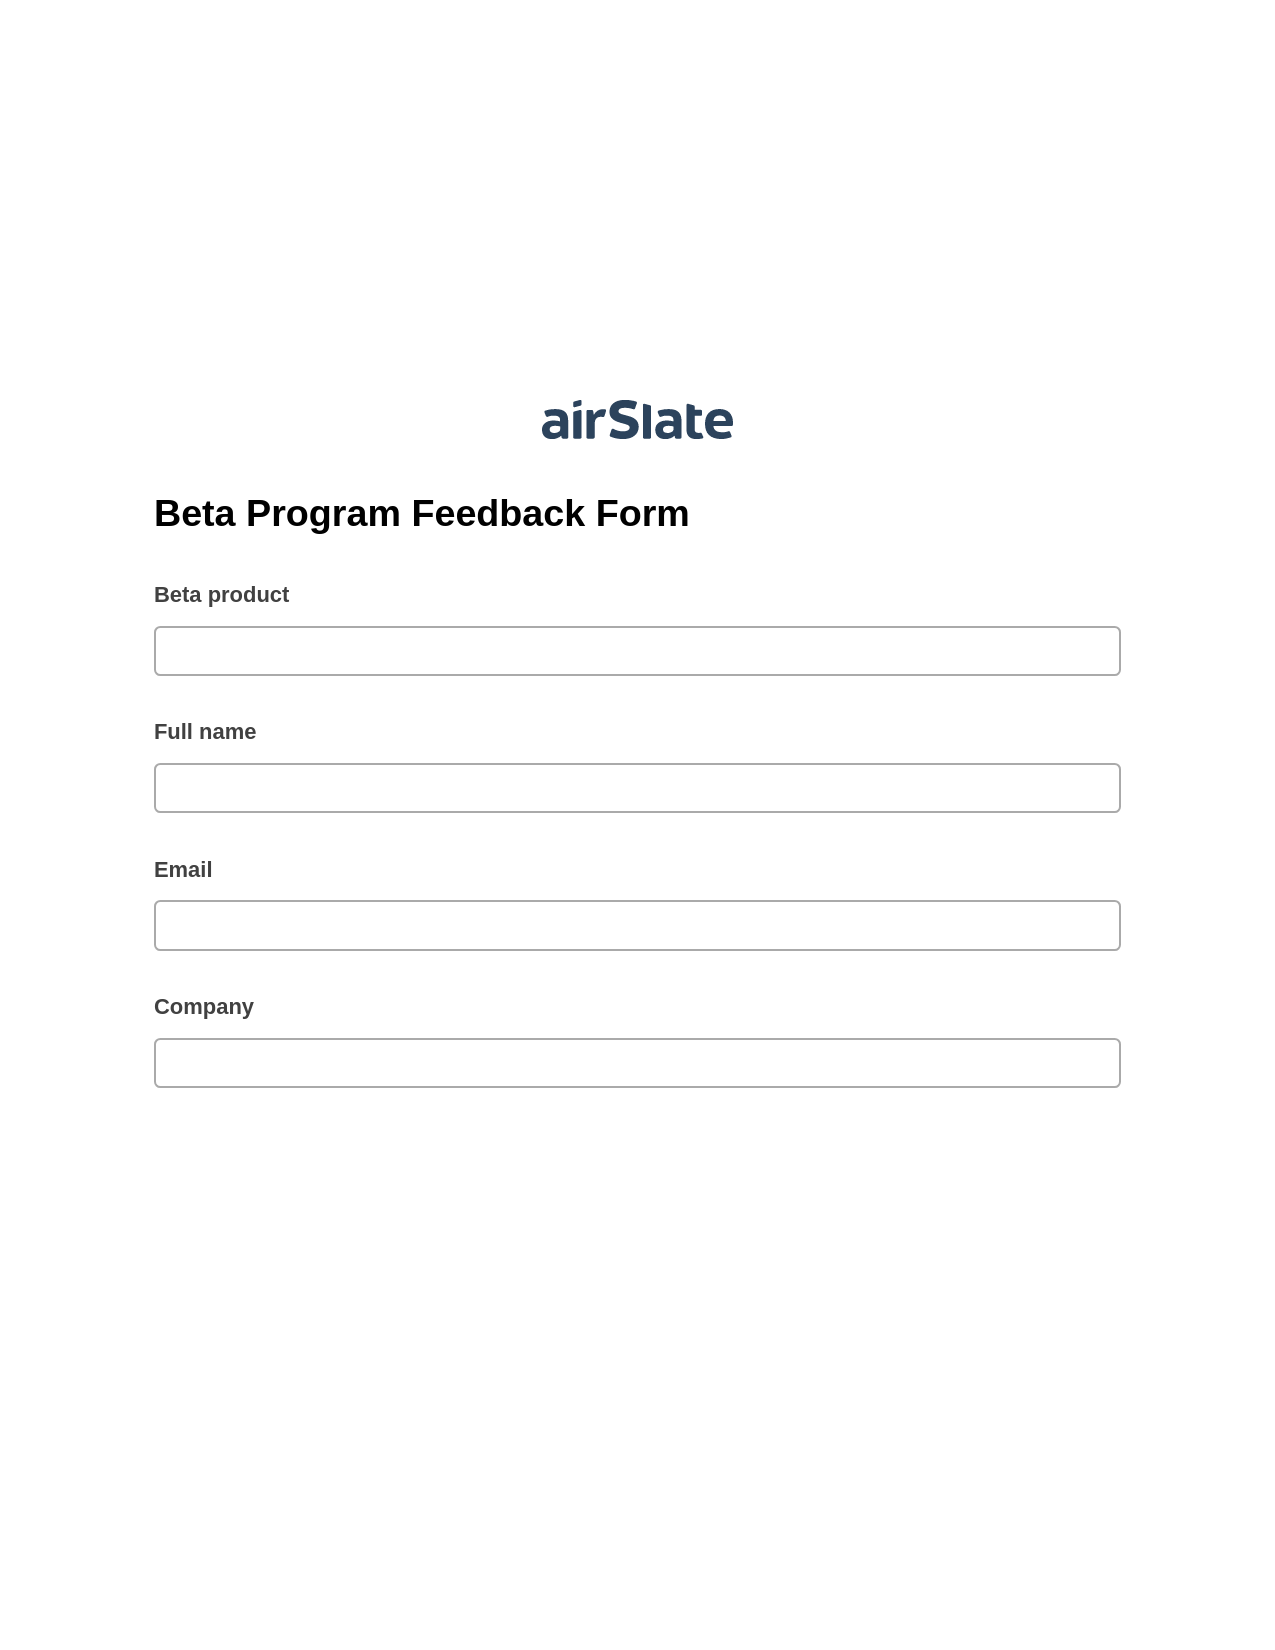 Multirole Beta Program Feedback Form Pre-fill from AirTable Bot, Webhook Bot, Archive to SharePoint Folder Bot